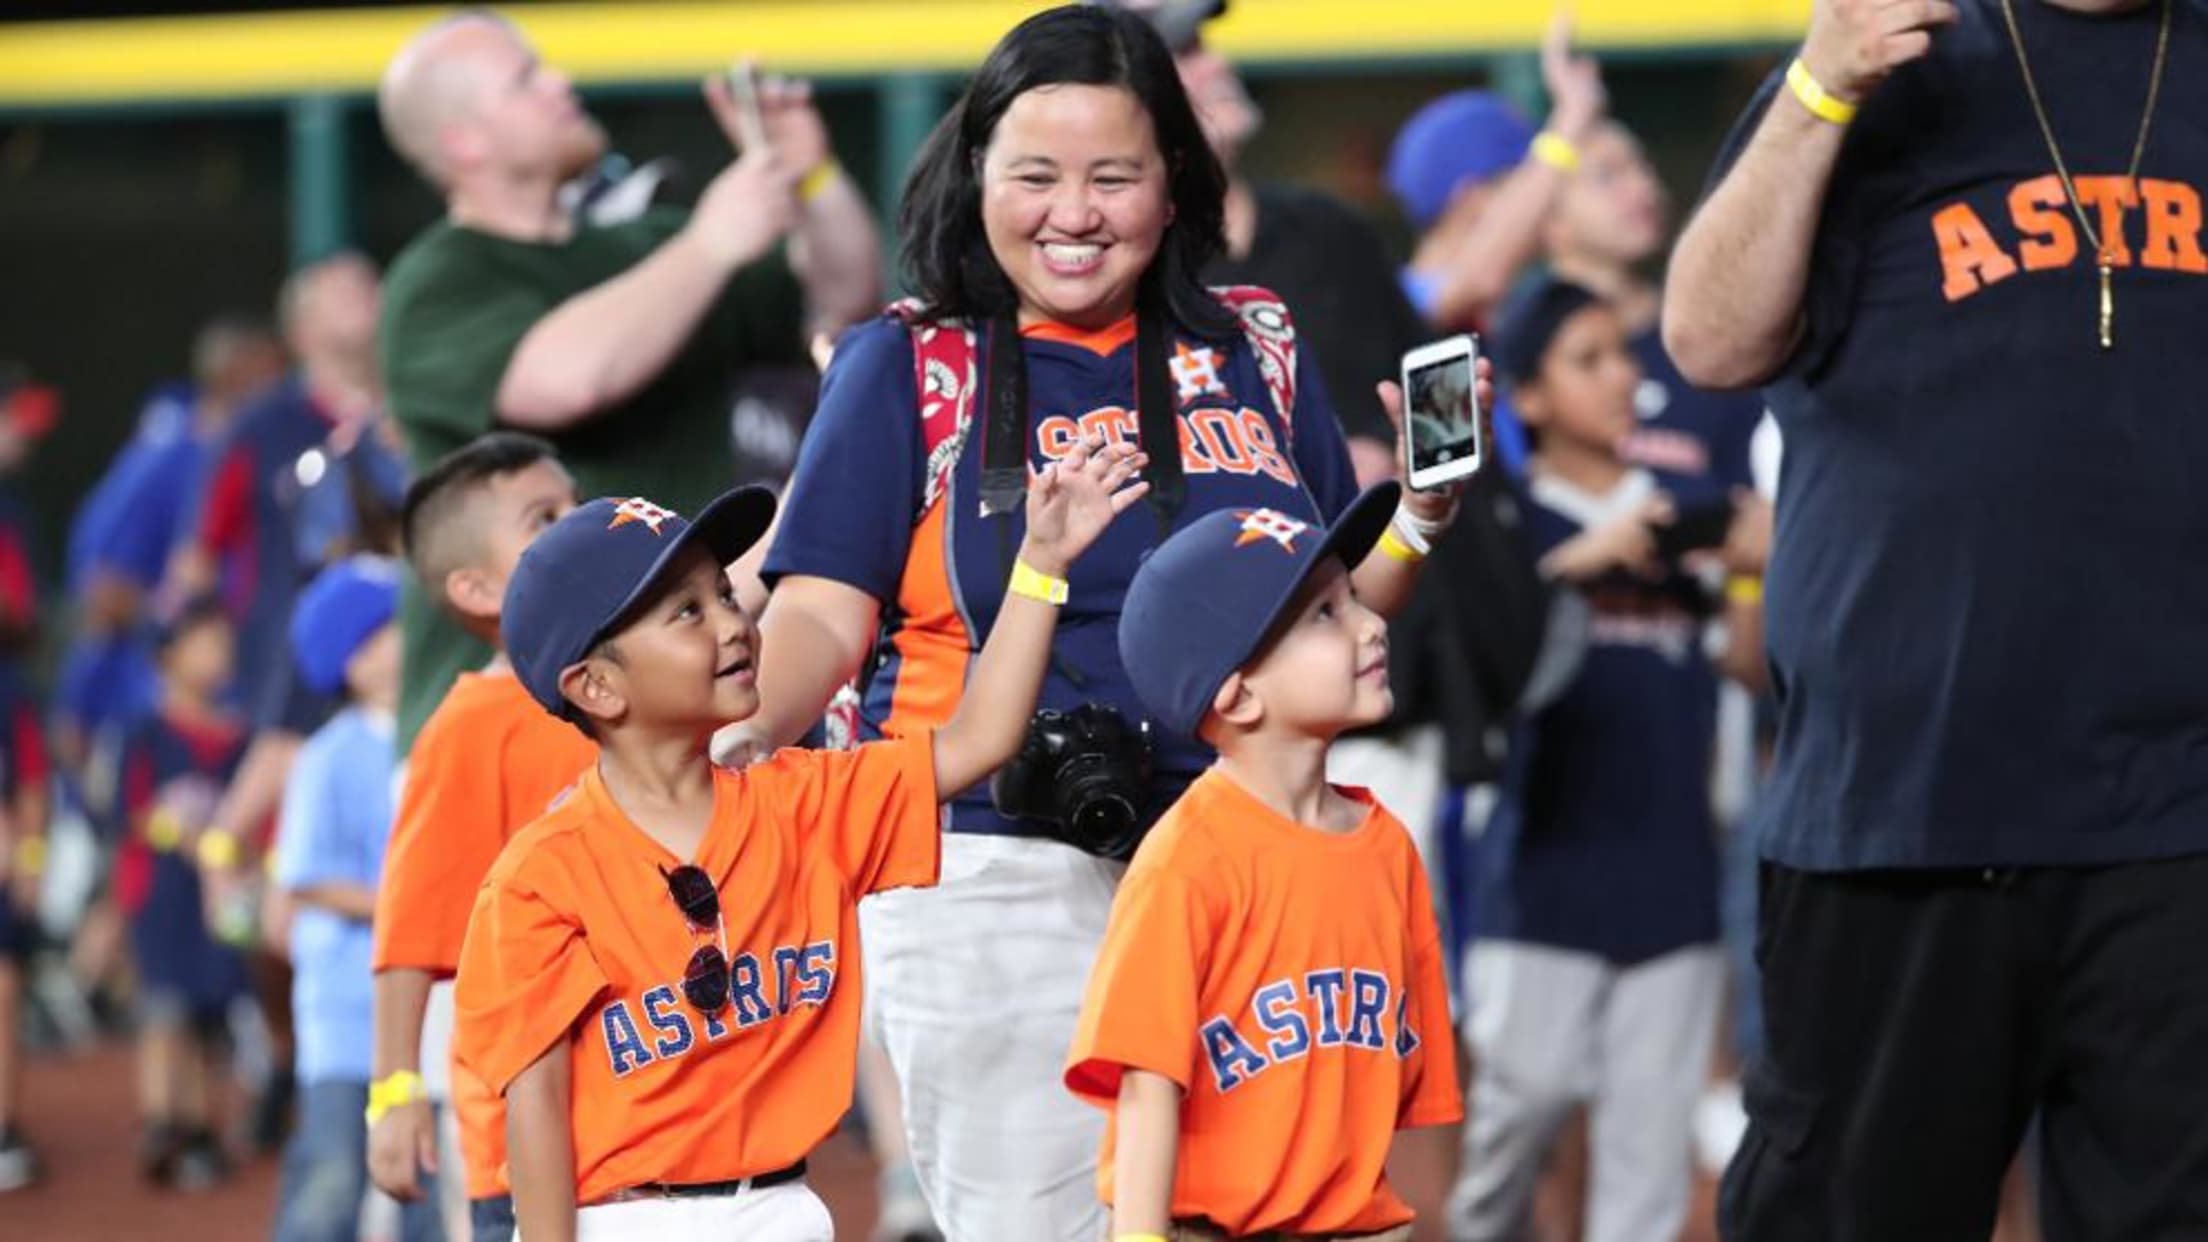 Little League - As MLB Opening Weekend kicks off, can you